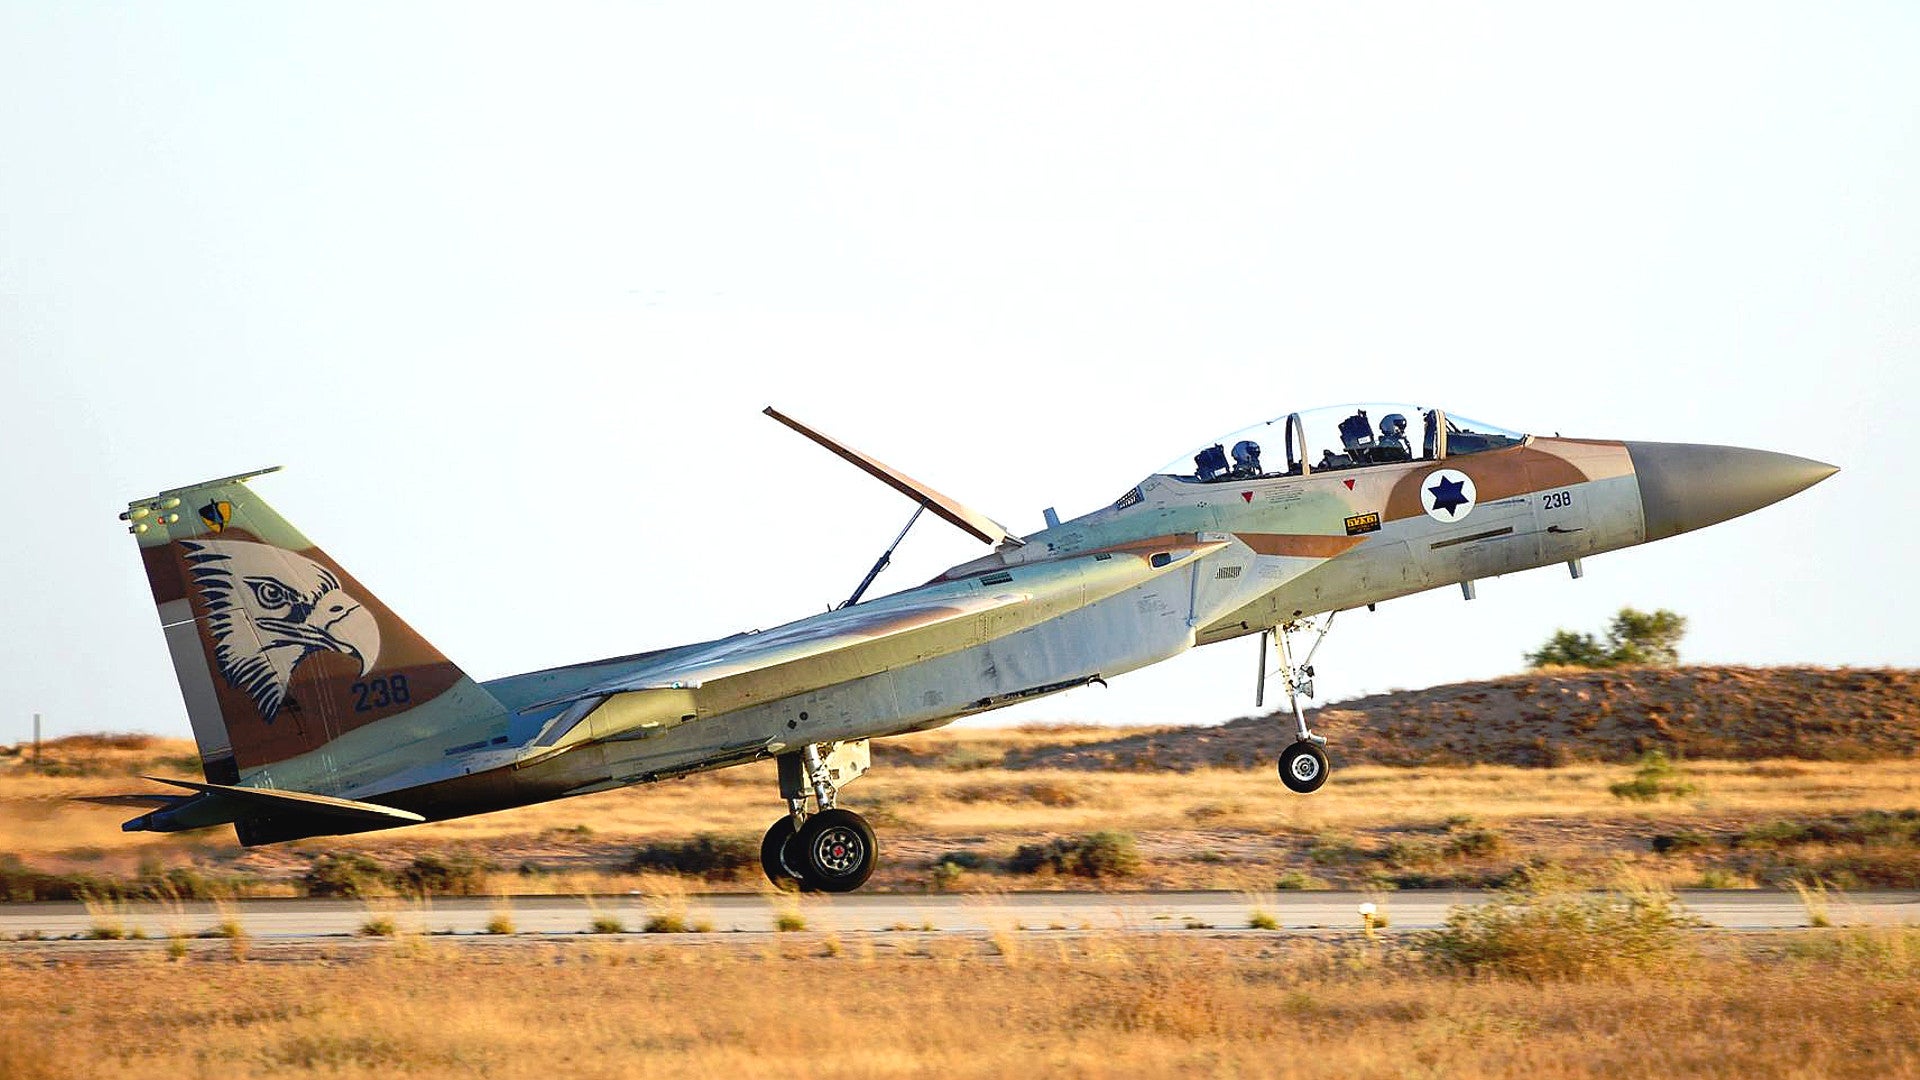 Let’s Talk About This Rumor That Israeli F-15s Mimicked US Jets To Strike At Iran In Syria